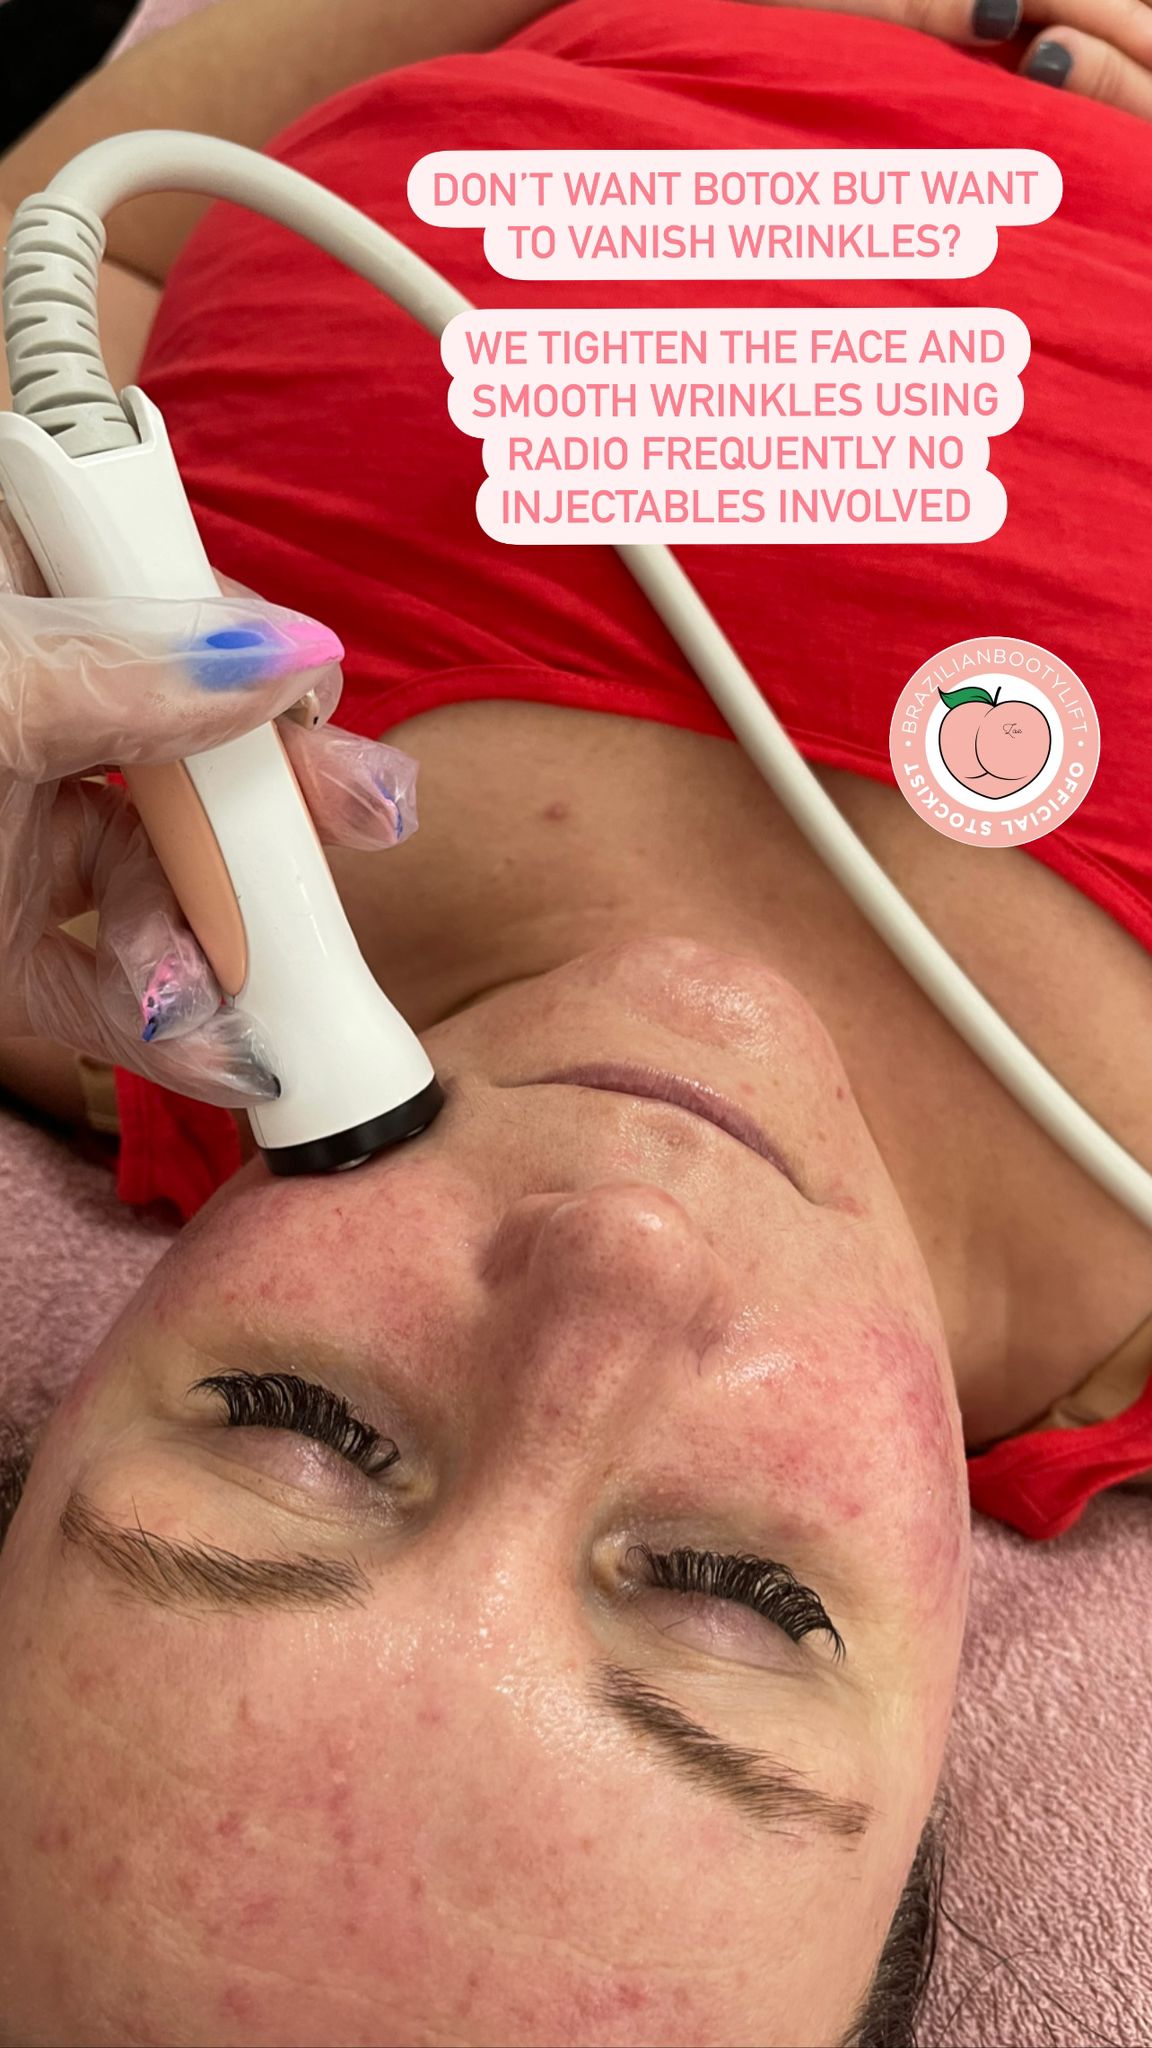 How Does A BBL Non-Surgical Facial lift Work? – An Honest Review